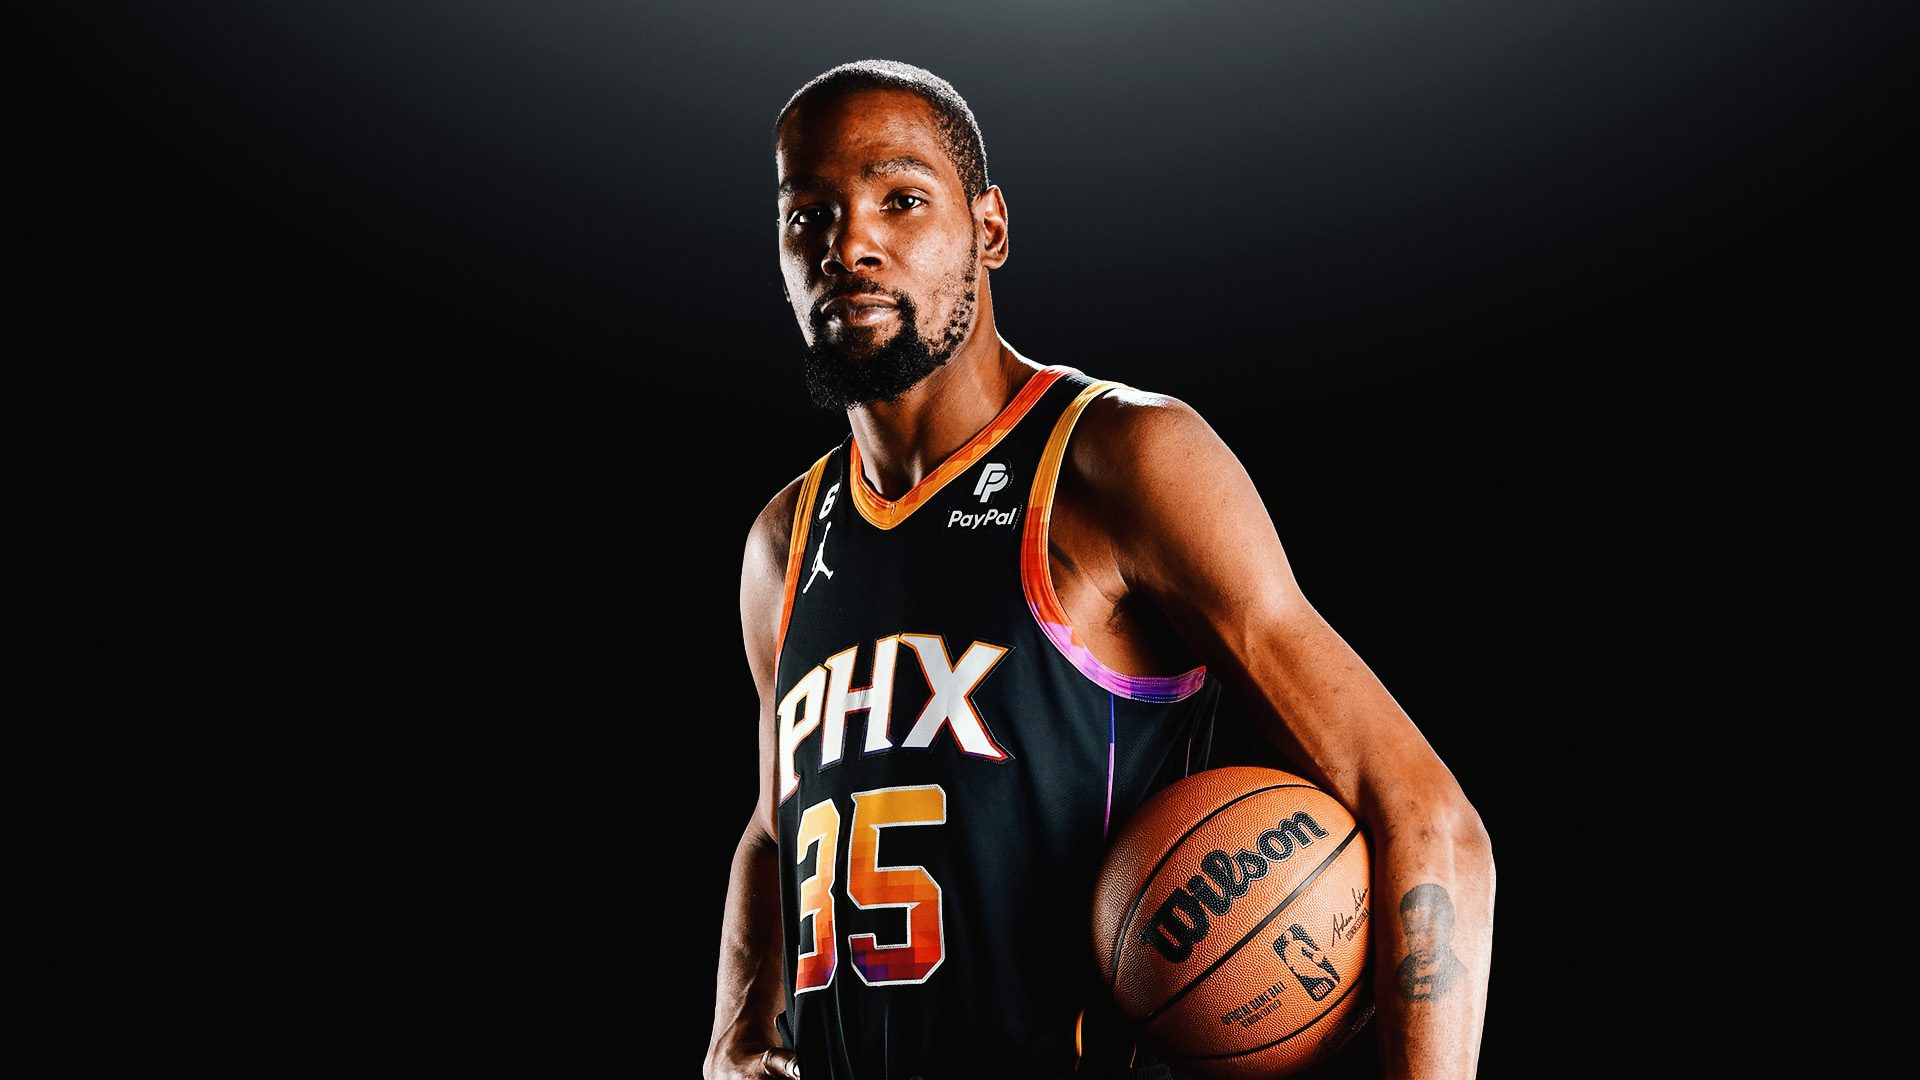 Kevin Durant  Phoenix Suns 35 in 2023  Kevin durant Phoenix suns Kevin  durant wallpapers